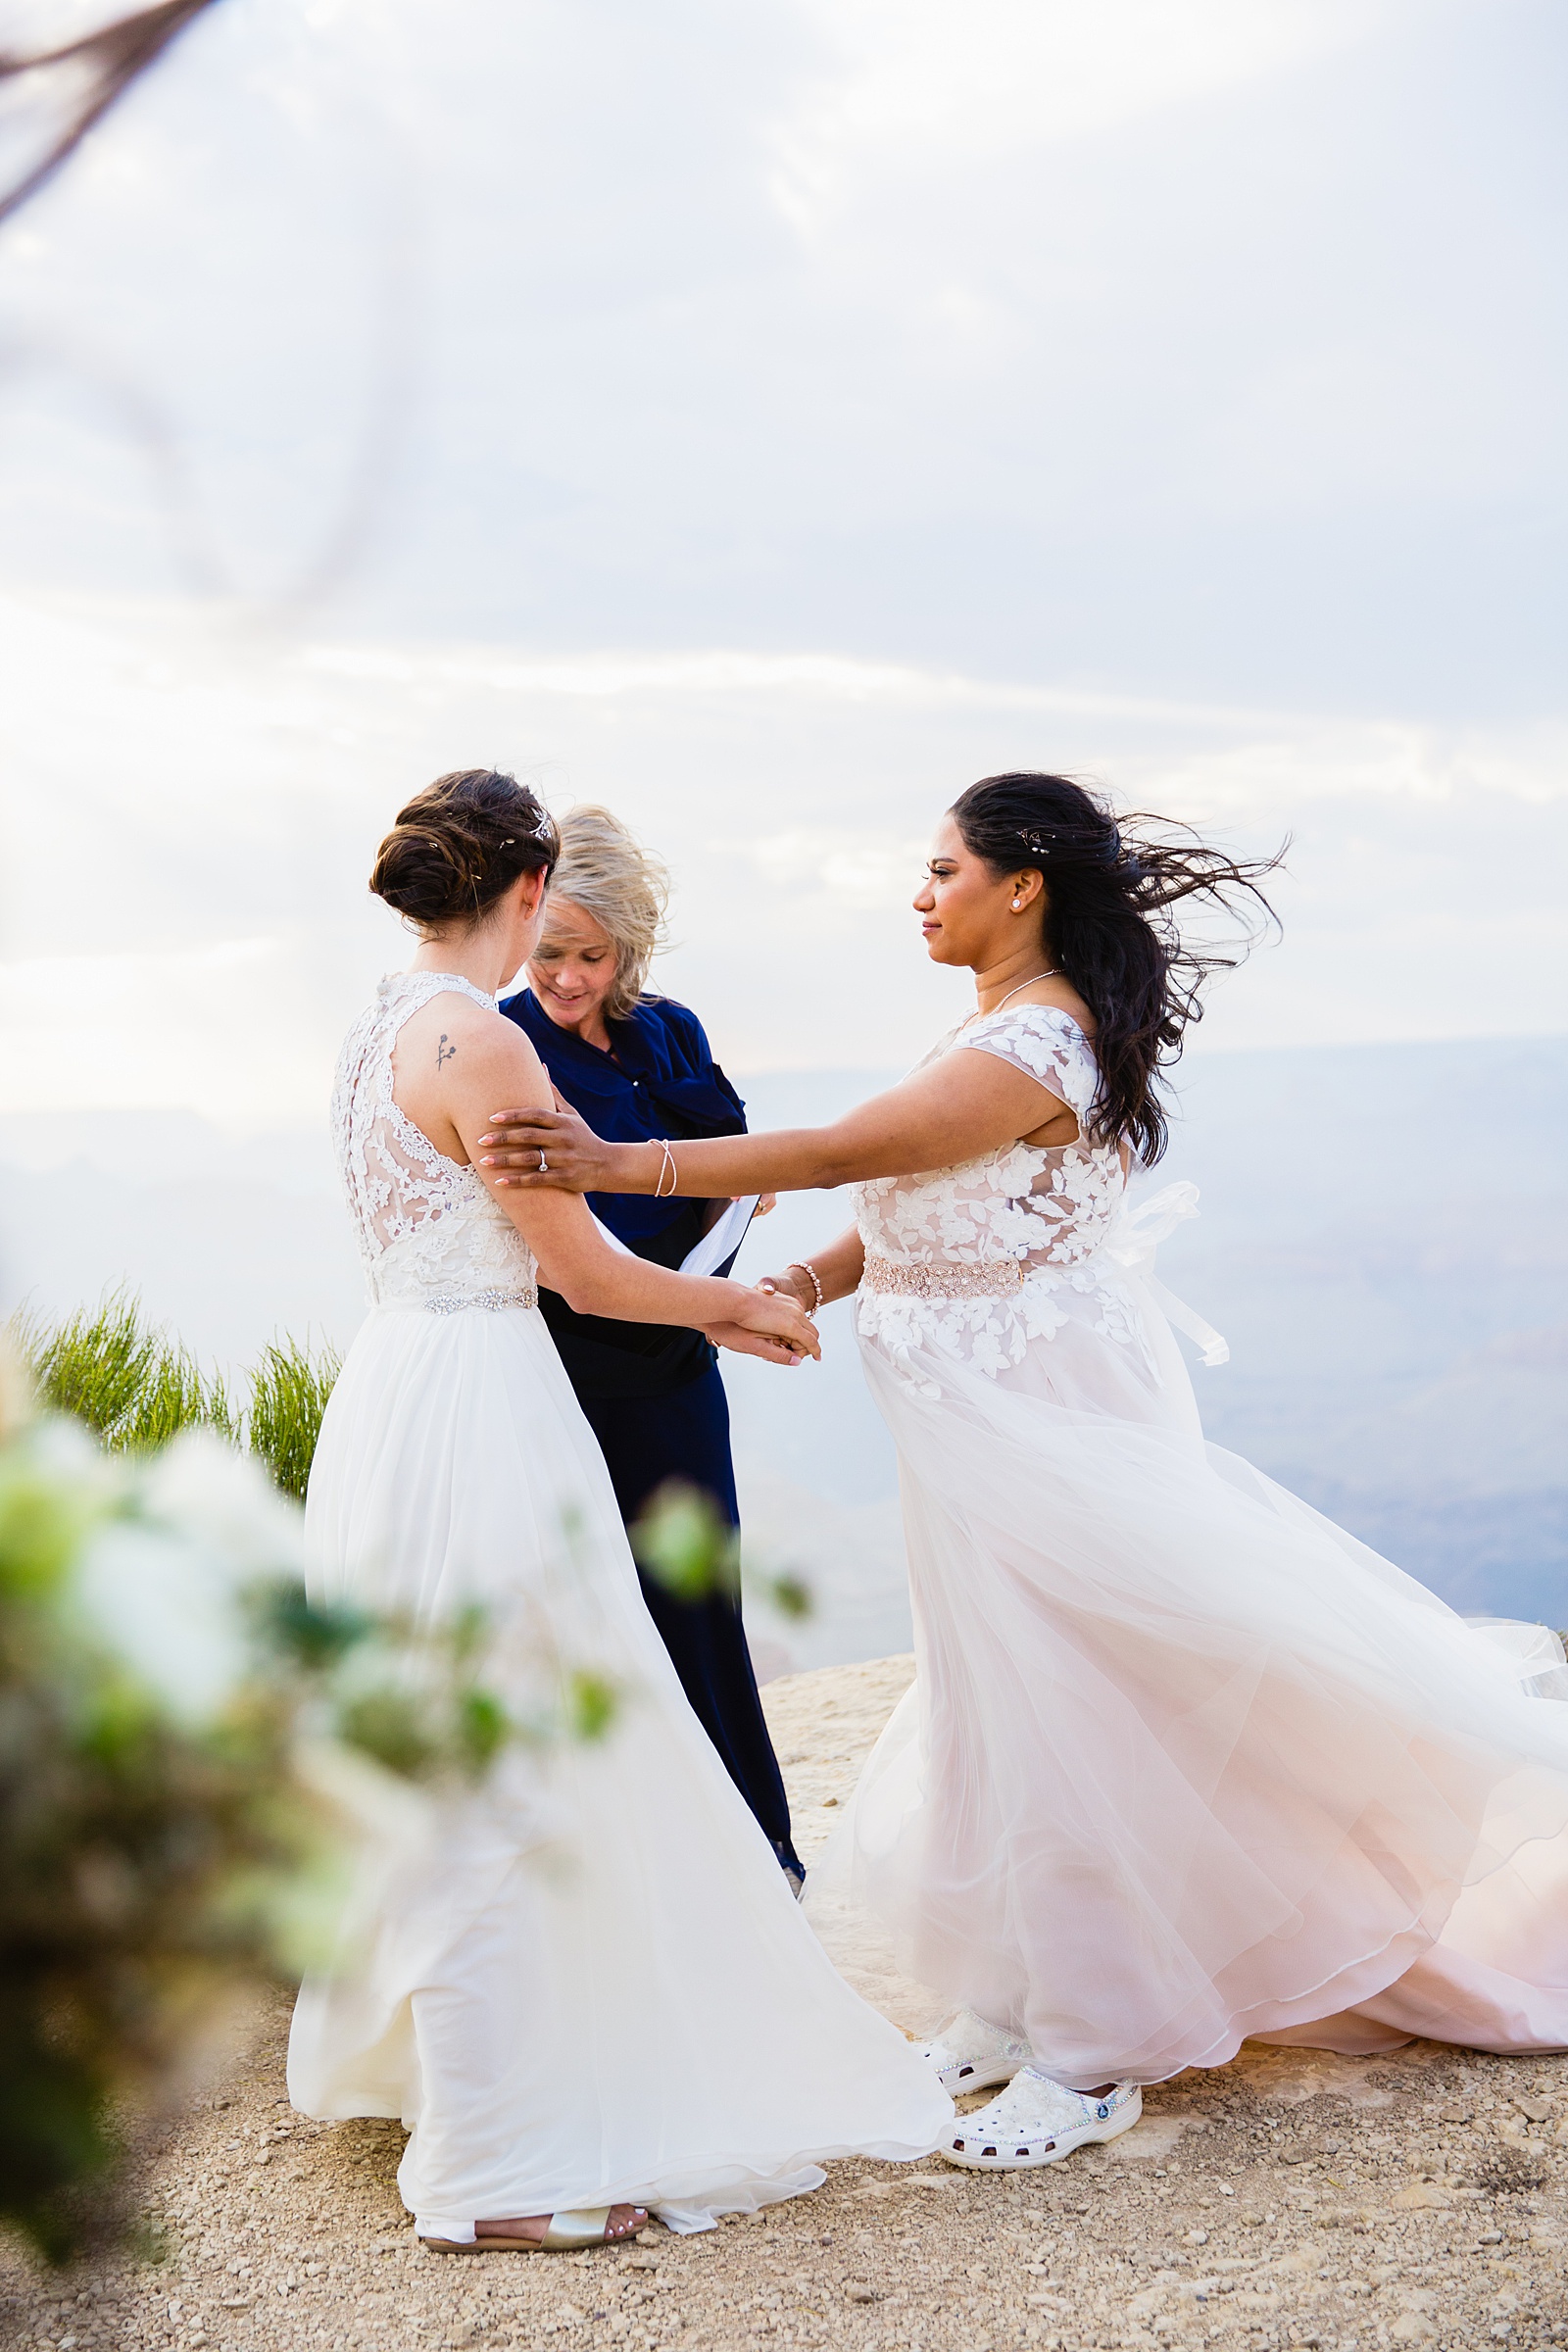 Brides share a moment during their wedding ceremony at their Grand Canyon elopement by PMA Photography.